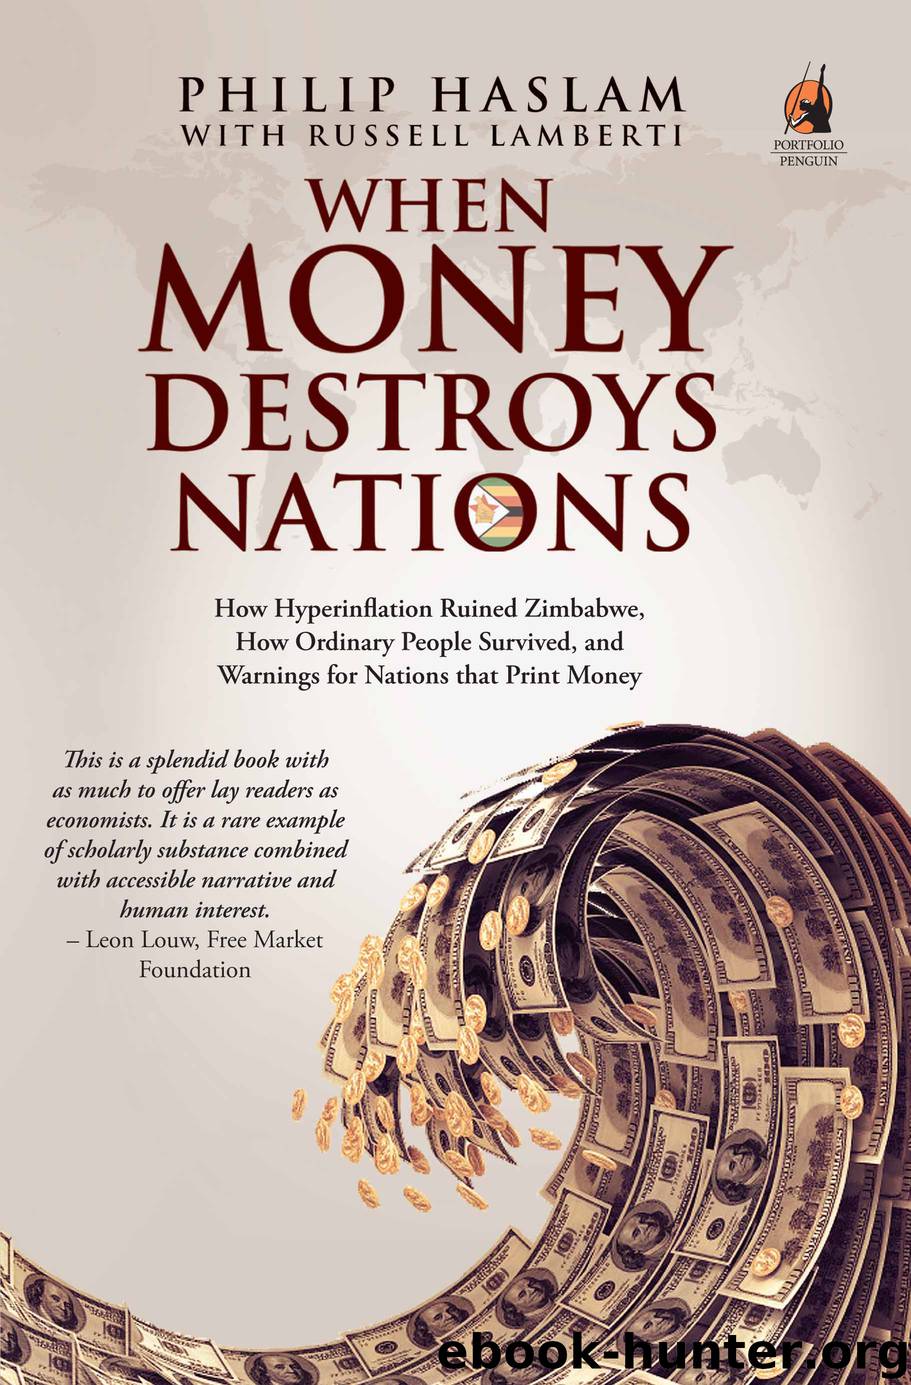 When Money Destroys Nations by Philip Haslam